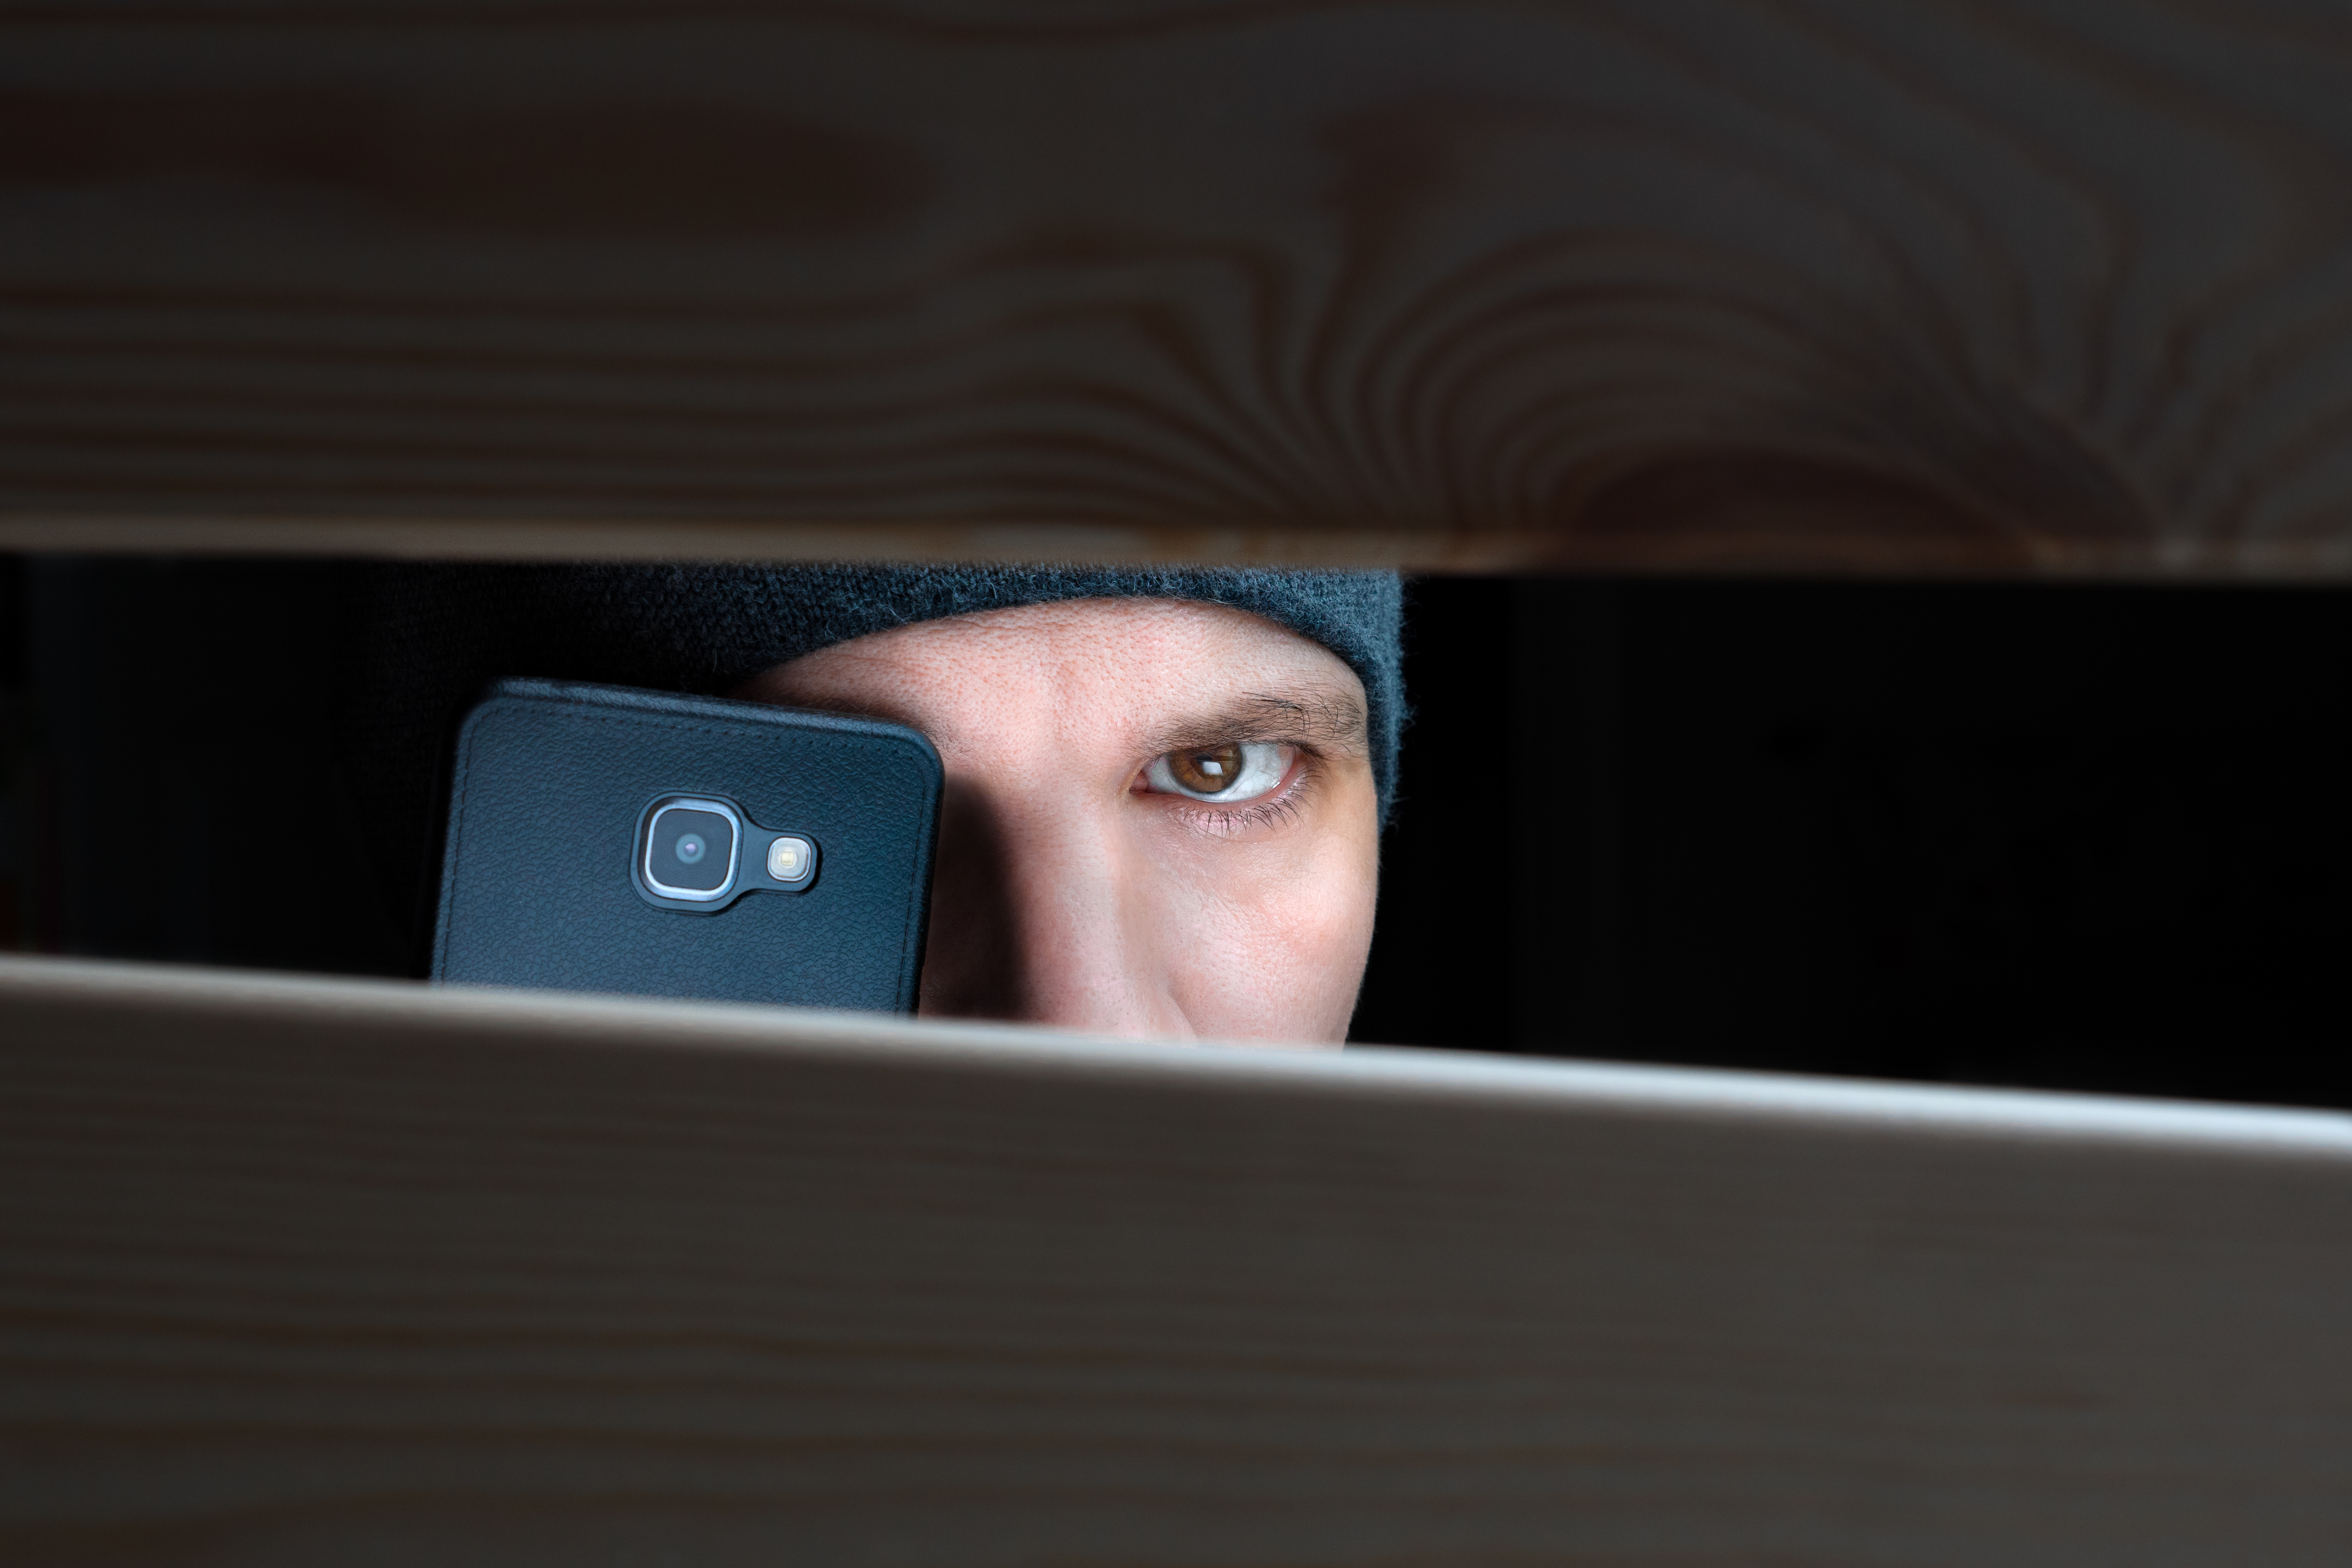 Man secretly filming person without consent in private act